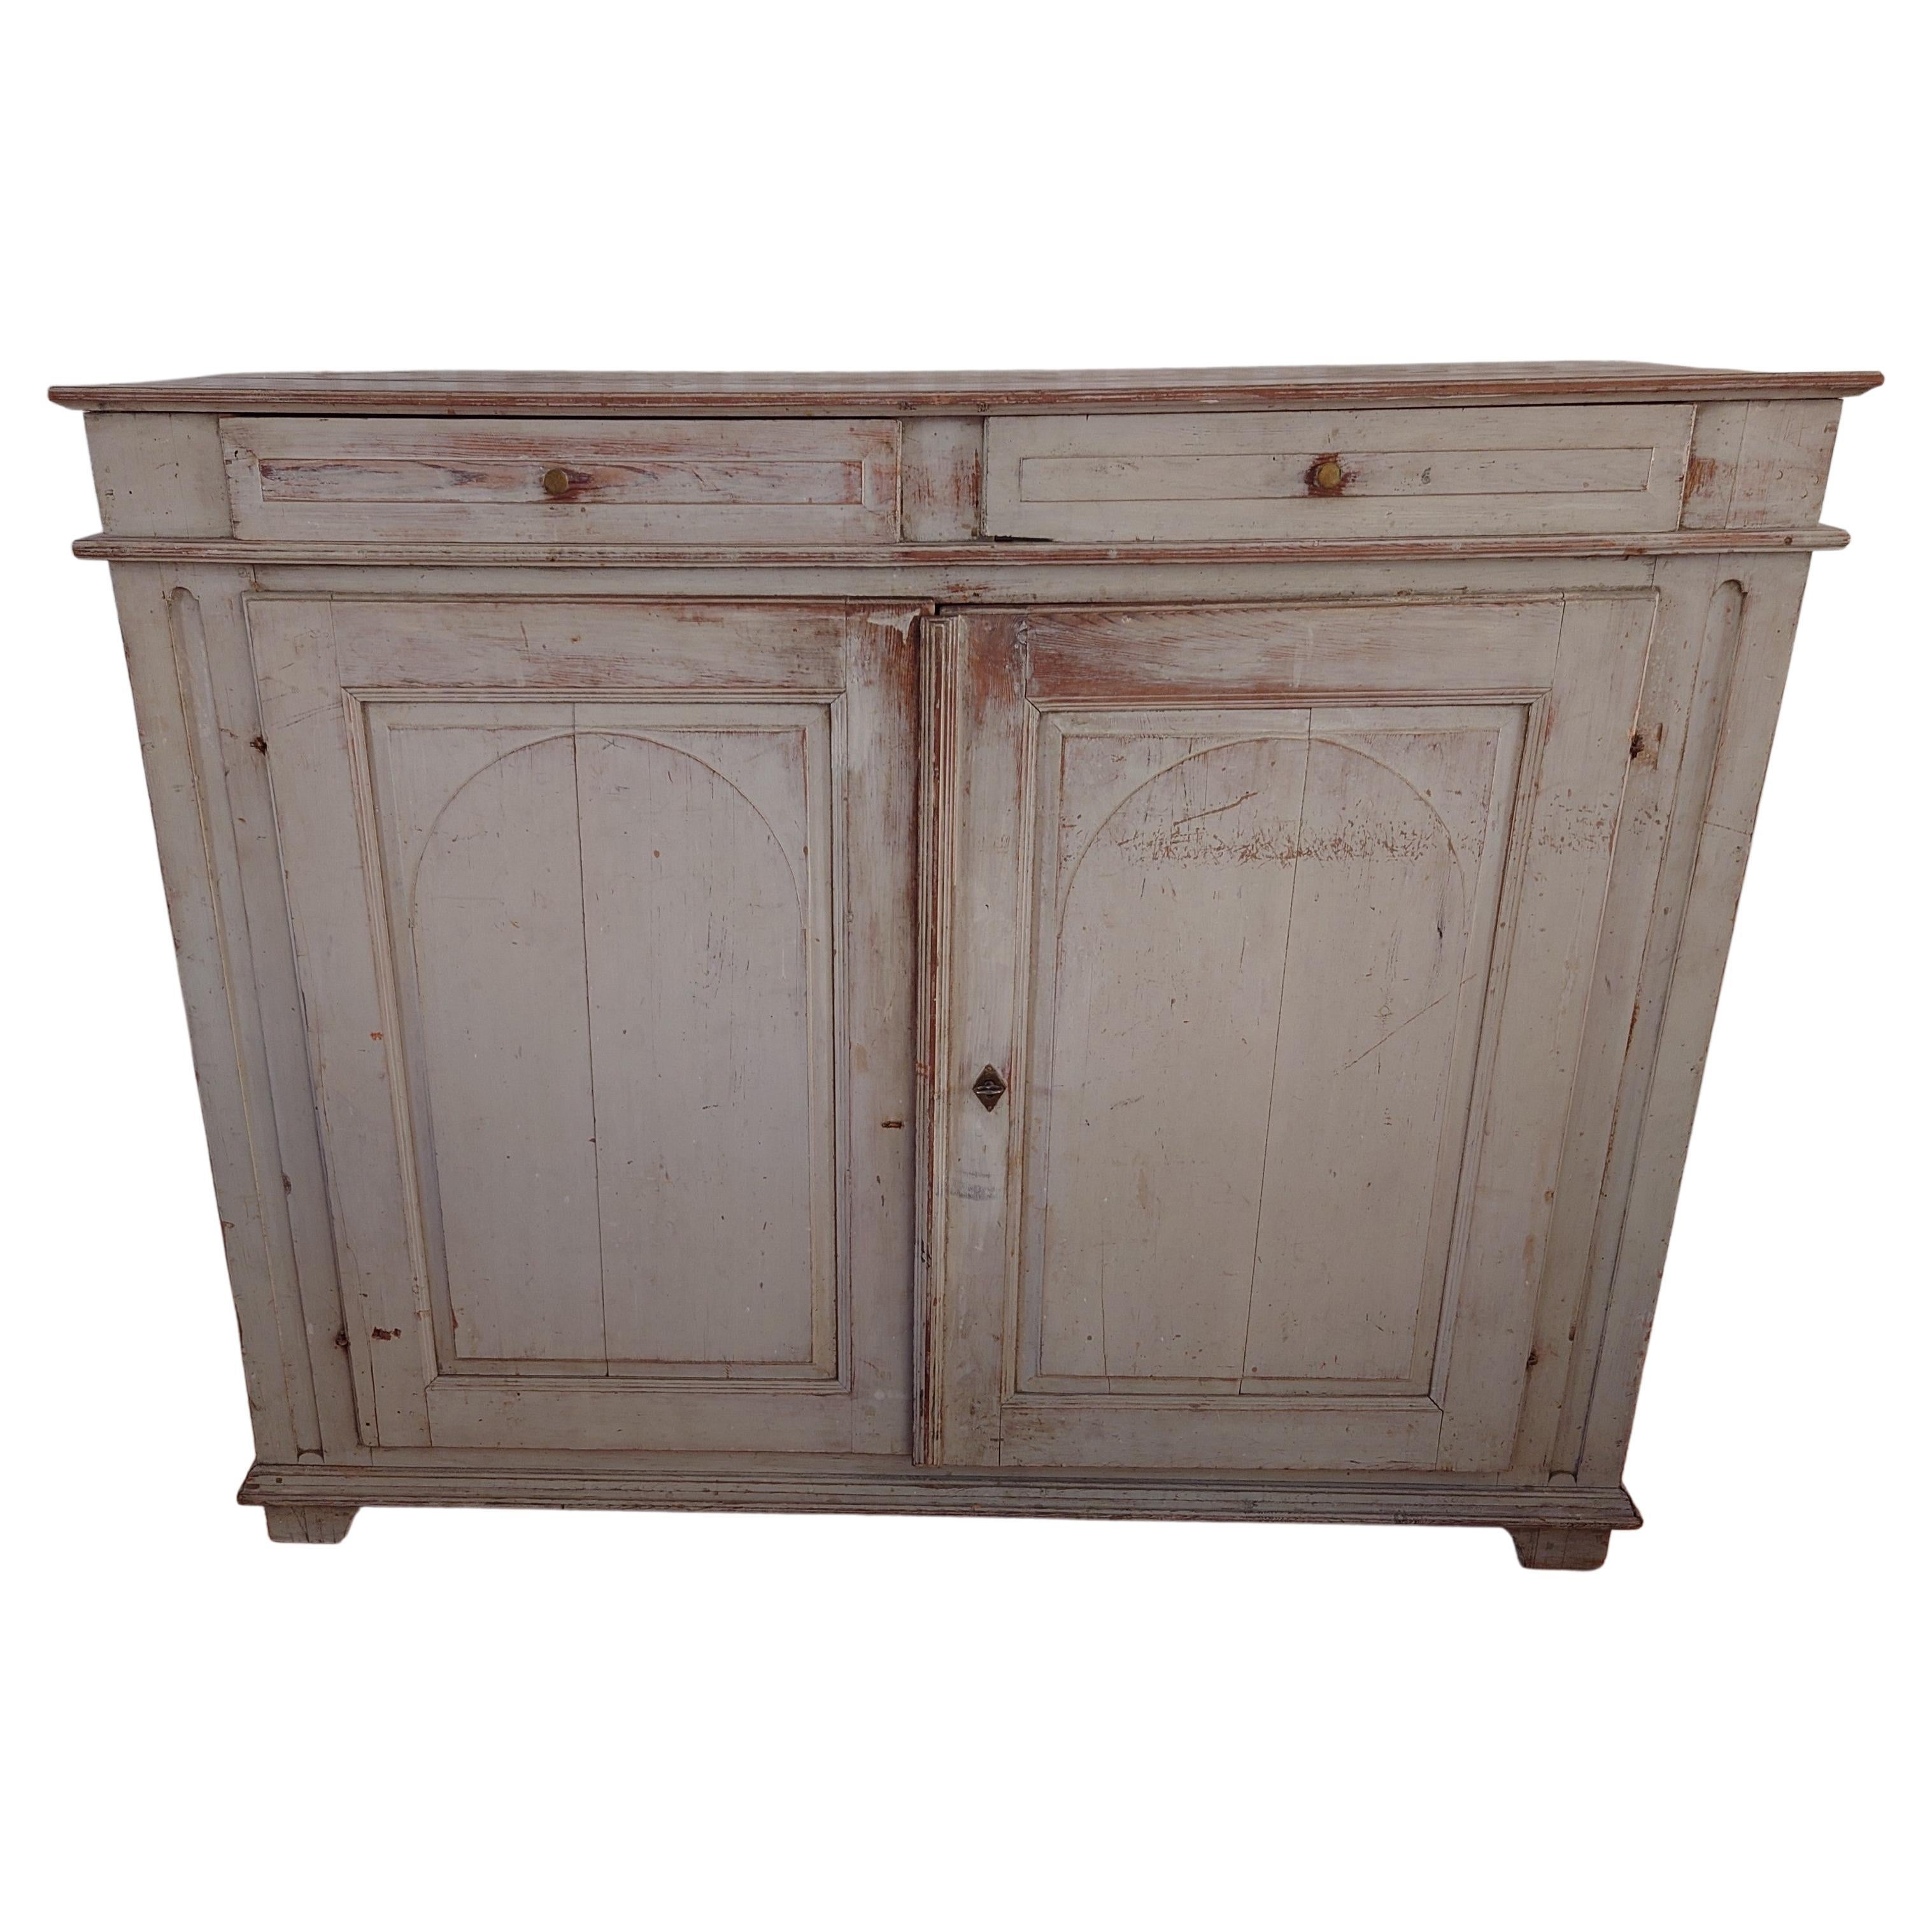 19th Century Swedish Antique Rustic  Late Gustavian Buffet / sideboard For Sale